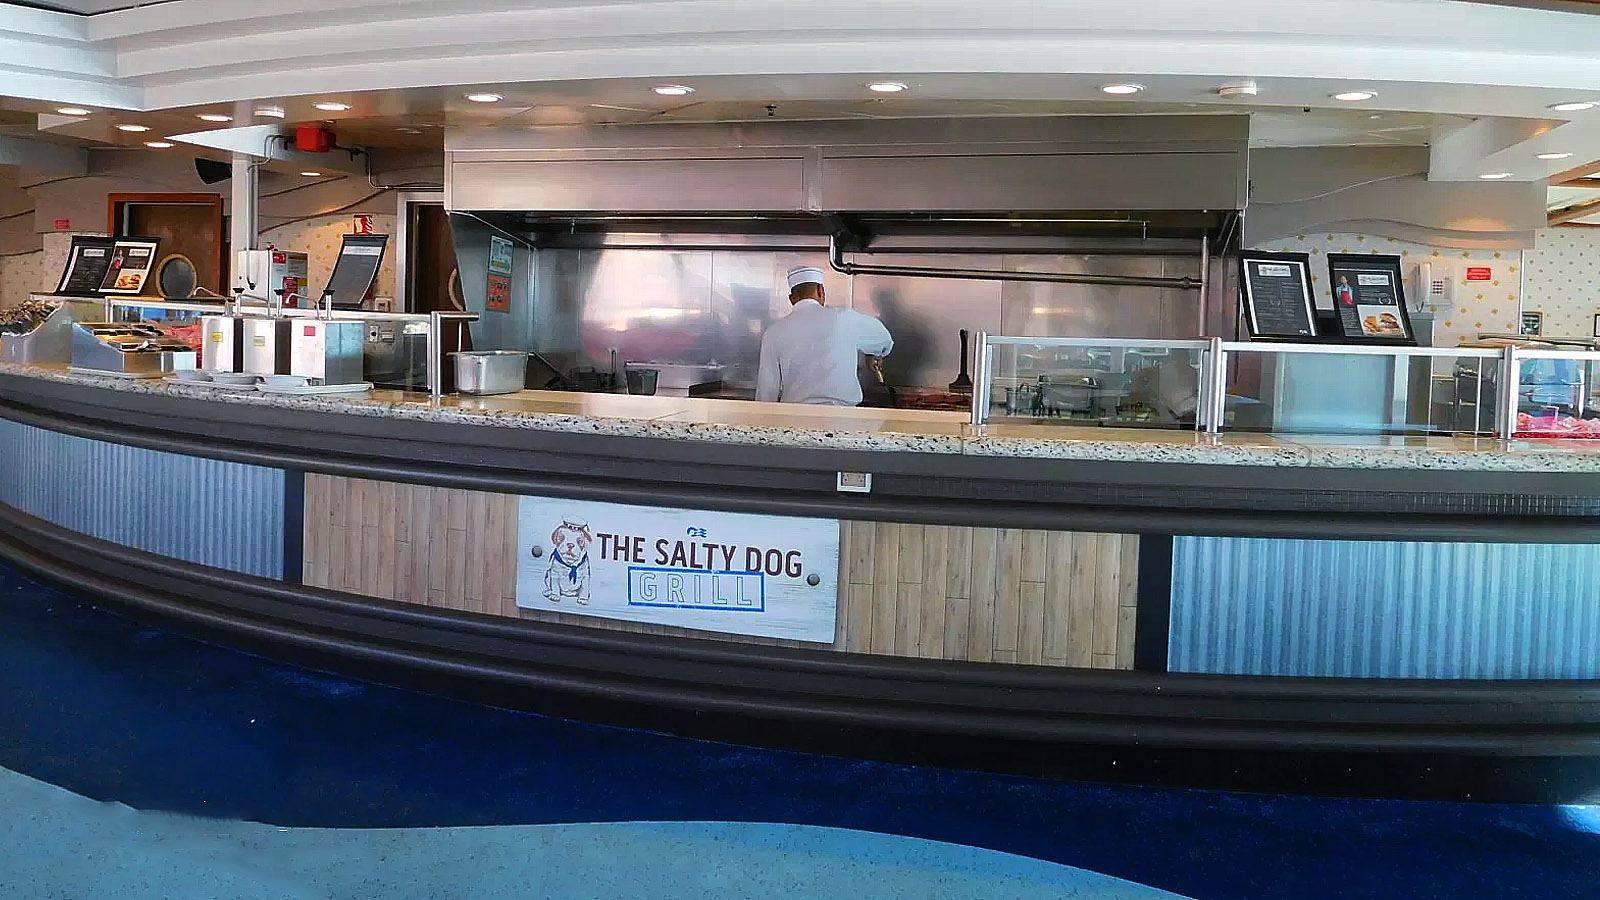 The Salty Dog Grill on the Princess Cruises Crown Princess